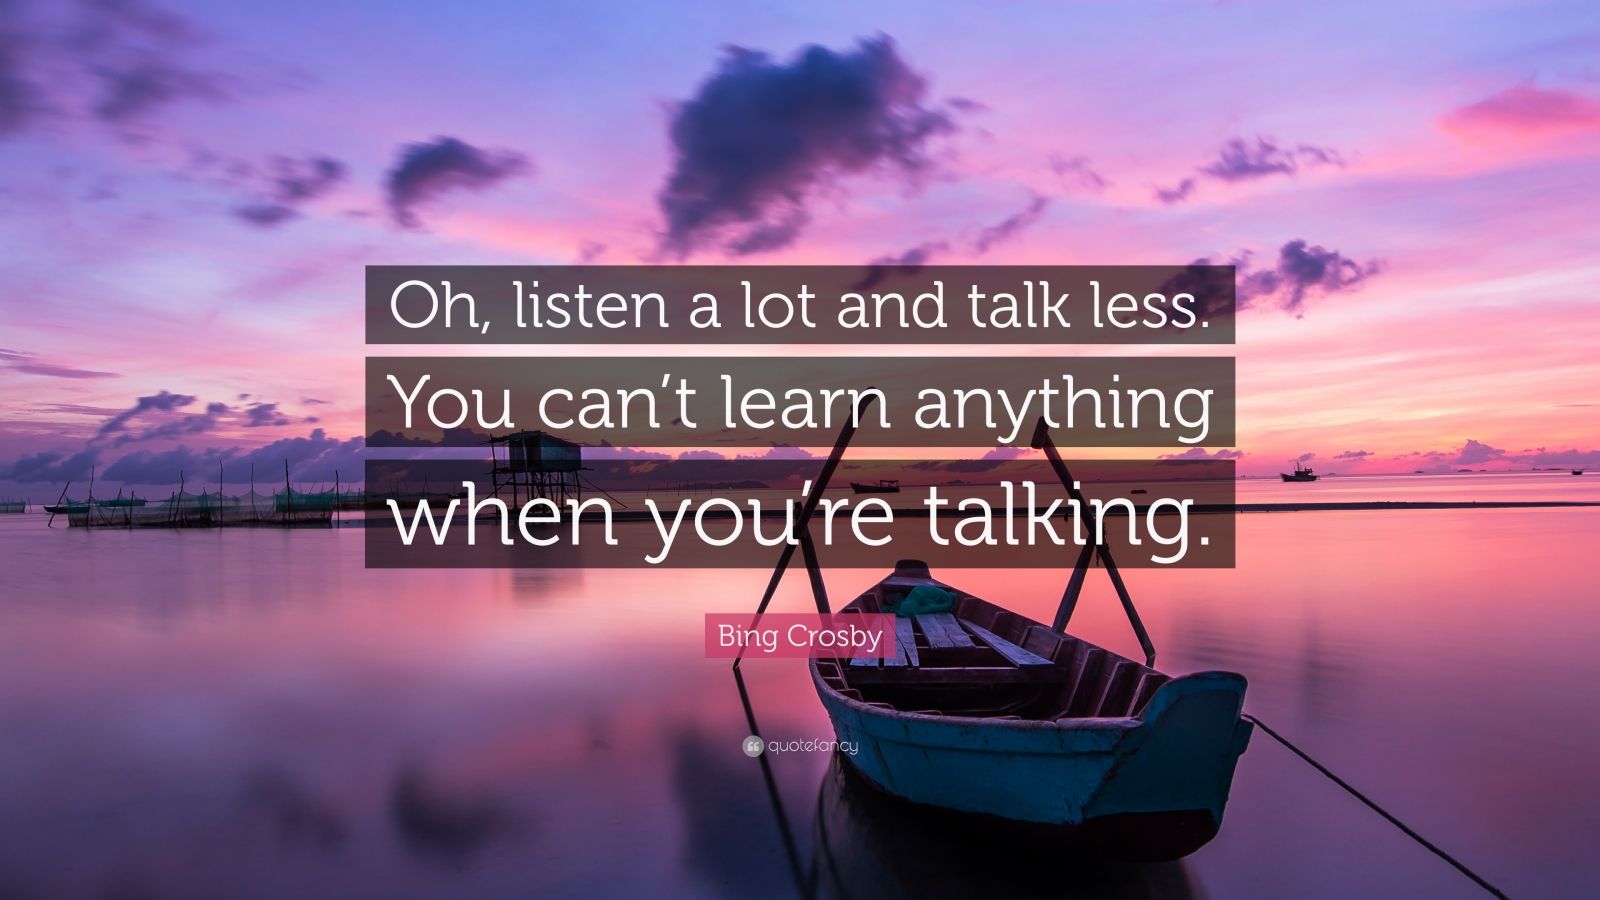 Bing Crosby Quote: “Oh, listen a lot and talk less. You can’t learn